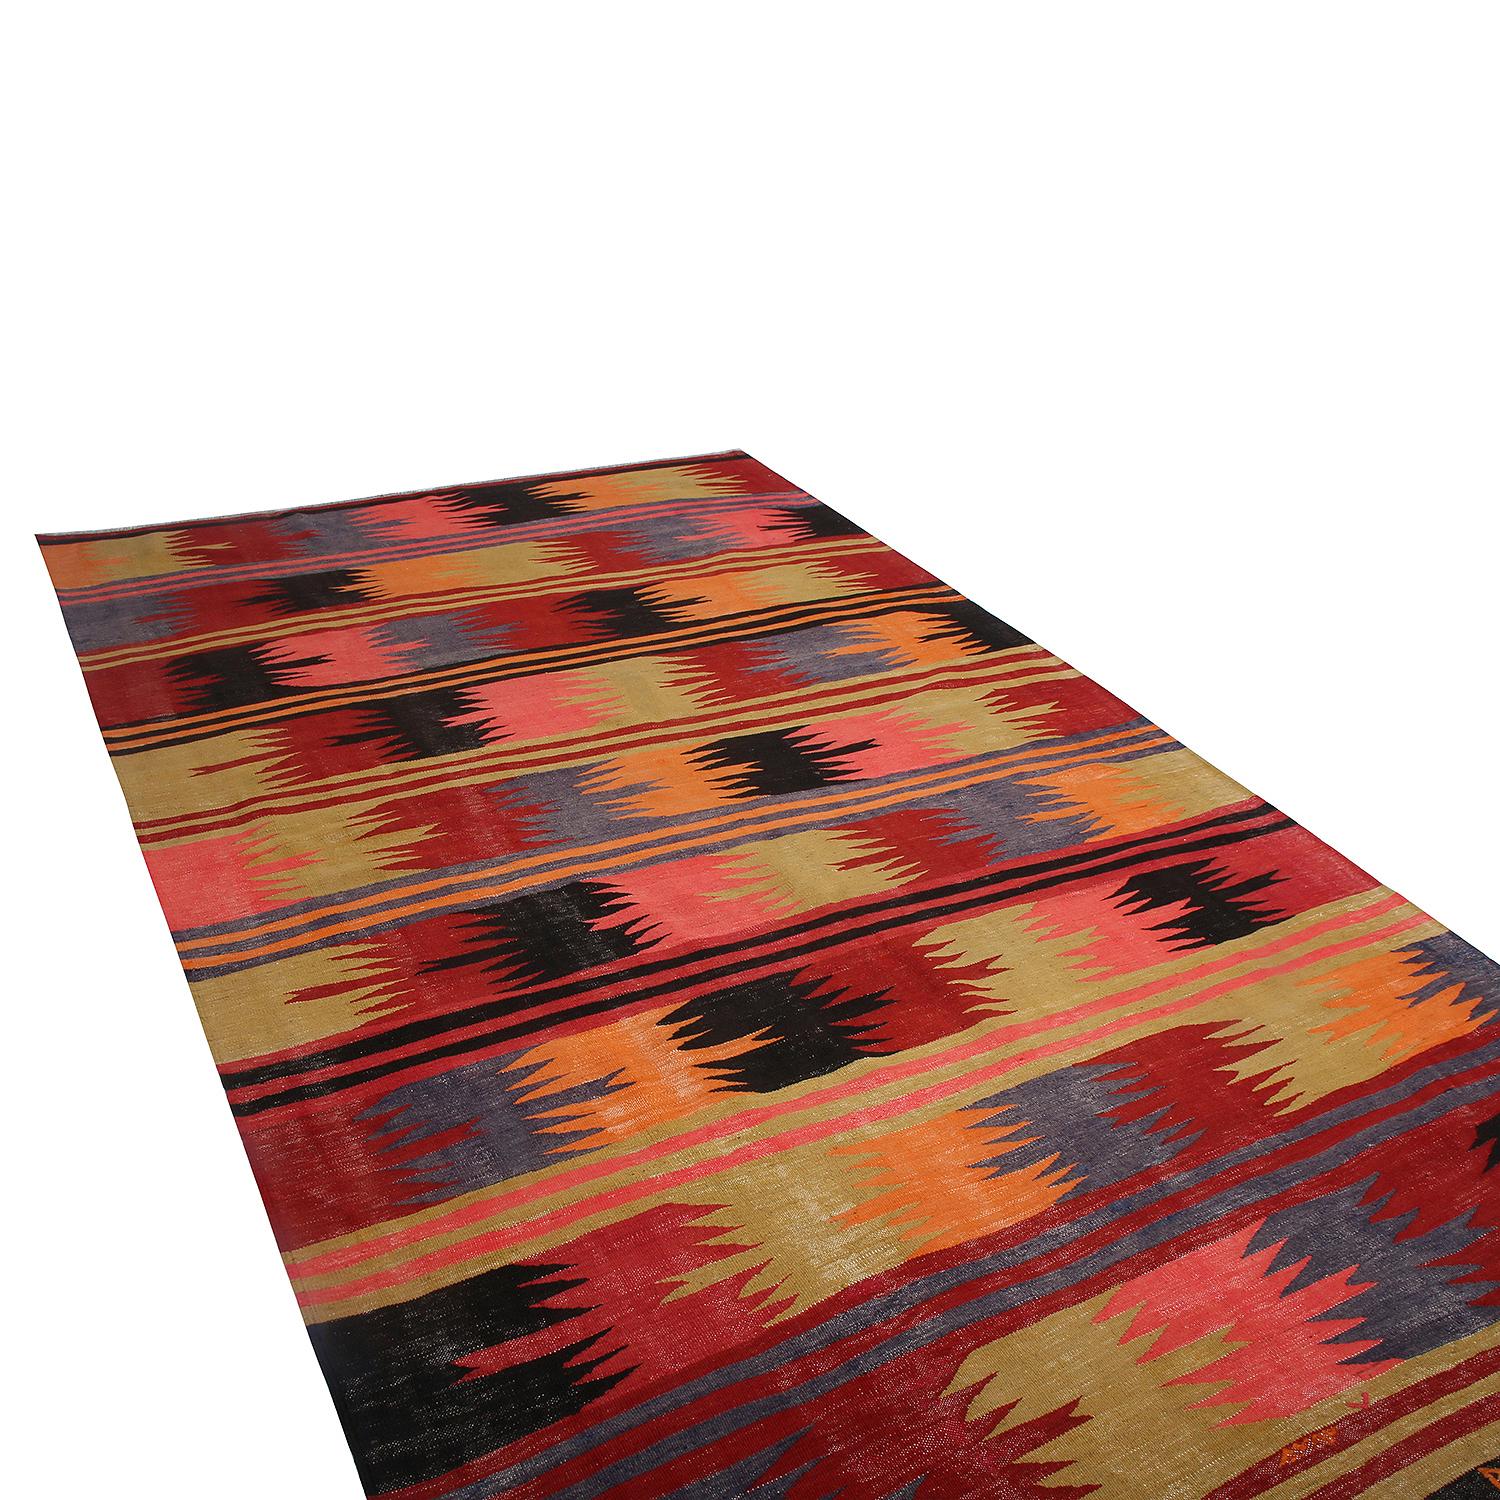 handwoven in Turkey originating between 1950-1960, this vintage mid-century wool Kilim hails from the Afyon province, presenting a bold multi-color pallet of tribal blue, red, green, pink, orange and blue complementing the meticulous geometric